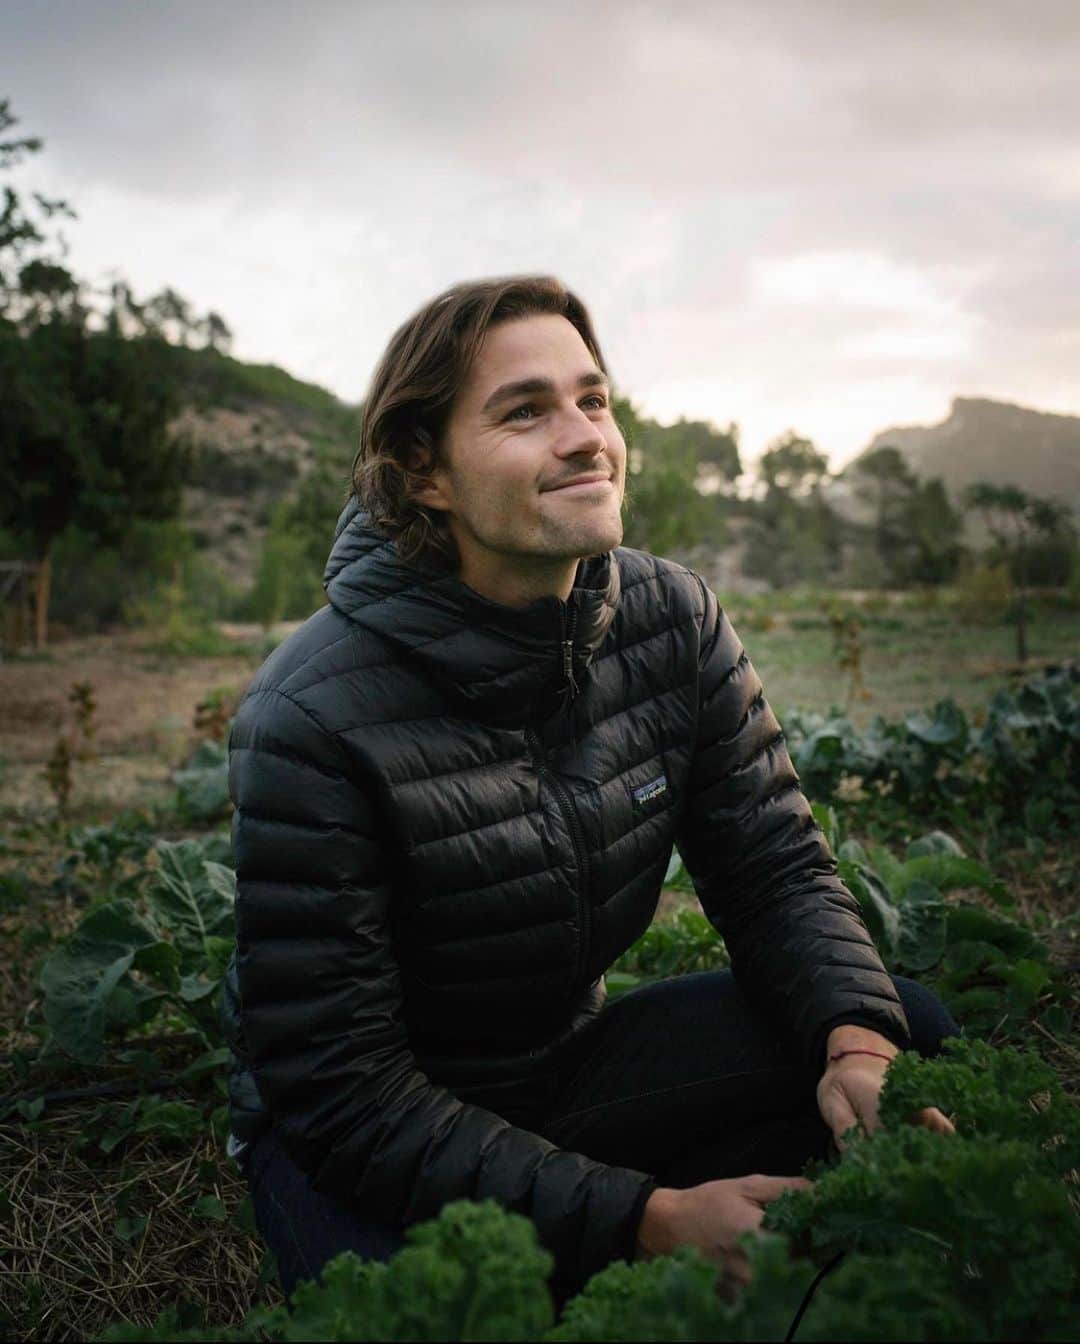 Jackson Harriesのインスタグラム：「Climate Change and Agriculture. 🚜🌾  What we eat and how we produce it has a massive impact on our environment. Changing our diets by reducing consumption of animal-based products is key to building a healthy regenerative agricultural system that works for everyone.   Six years ago I stopped eating meat and it completely changed my relationship to food. Rather than thinking about what I couldn’t eat, I started to think more creatively and discovered so many amazing plant-based foods. What’s your thoughts on veganism and plant-based diets? I’d love to know your thoughts in the comments below.   This is the first in a new series we’ll be more exploring more on @earthrise.studio. 🌱🌎」